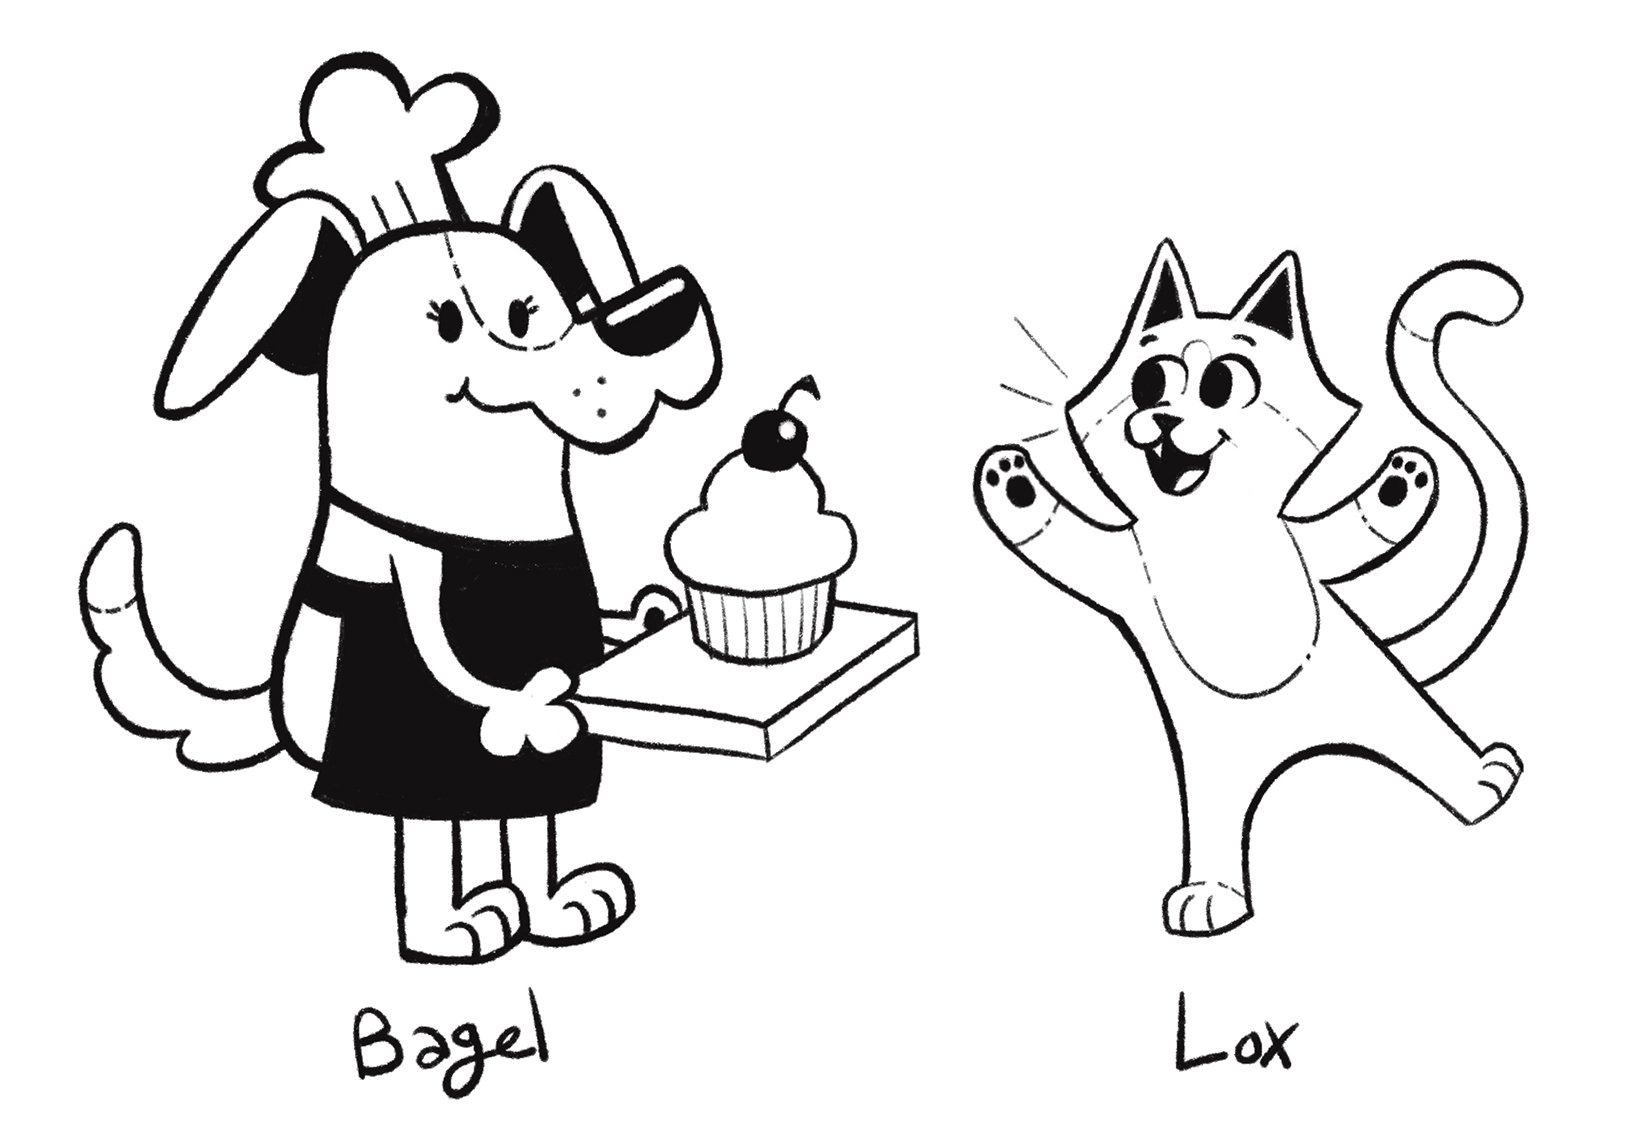 Bagel and Lox Character Illustration.jpg